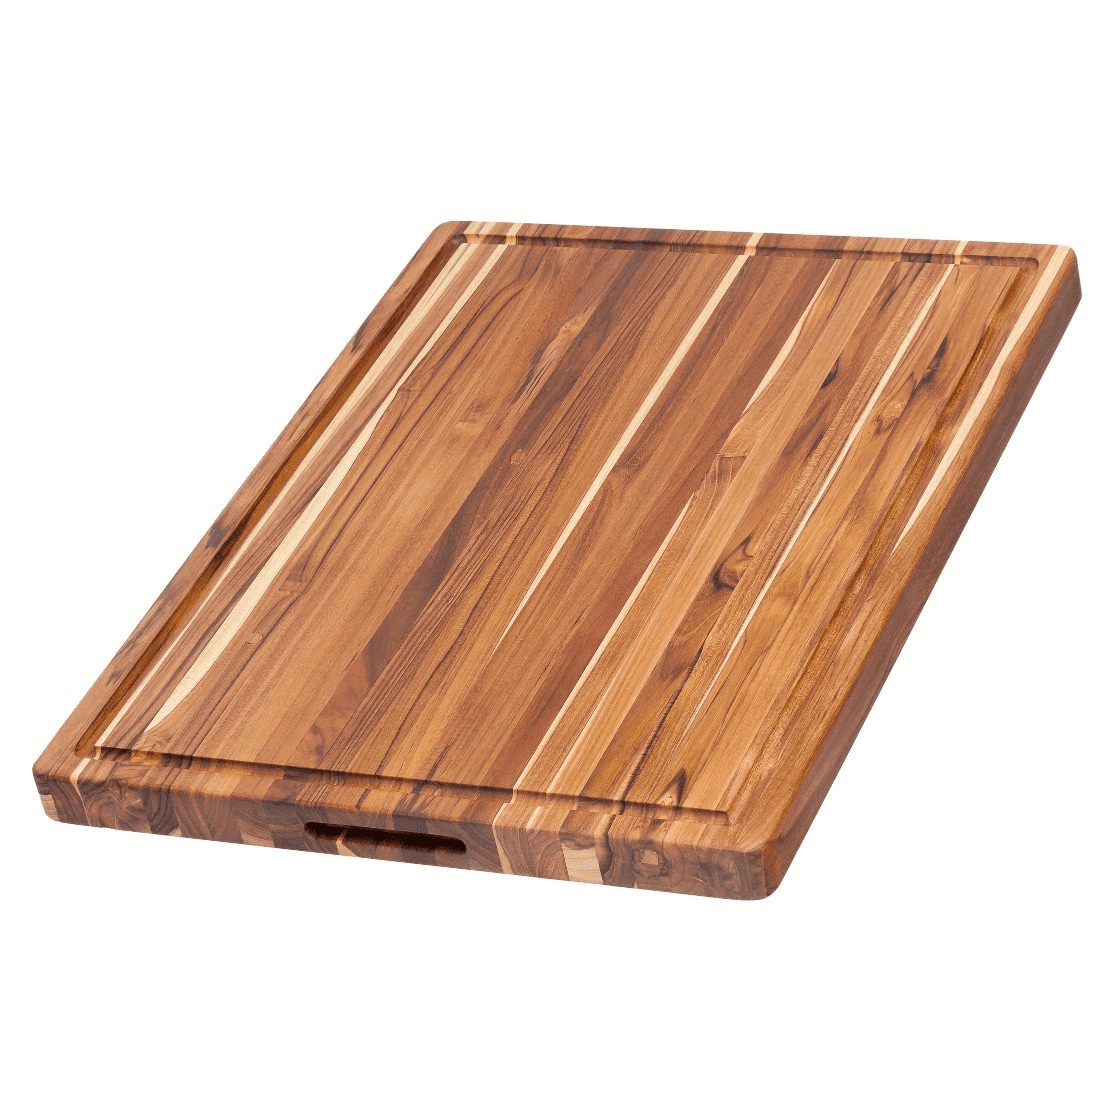 Tatayosi 1-Pieces Medium Size 20 in. x 15 in. x 1.25 in. Teak Cutting Board for Chopping Cutting Food Meat Fruit Vegetable, Natural